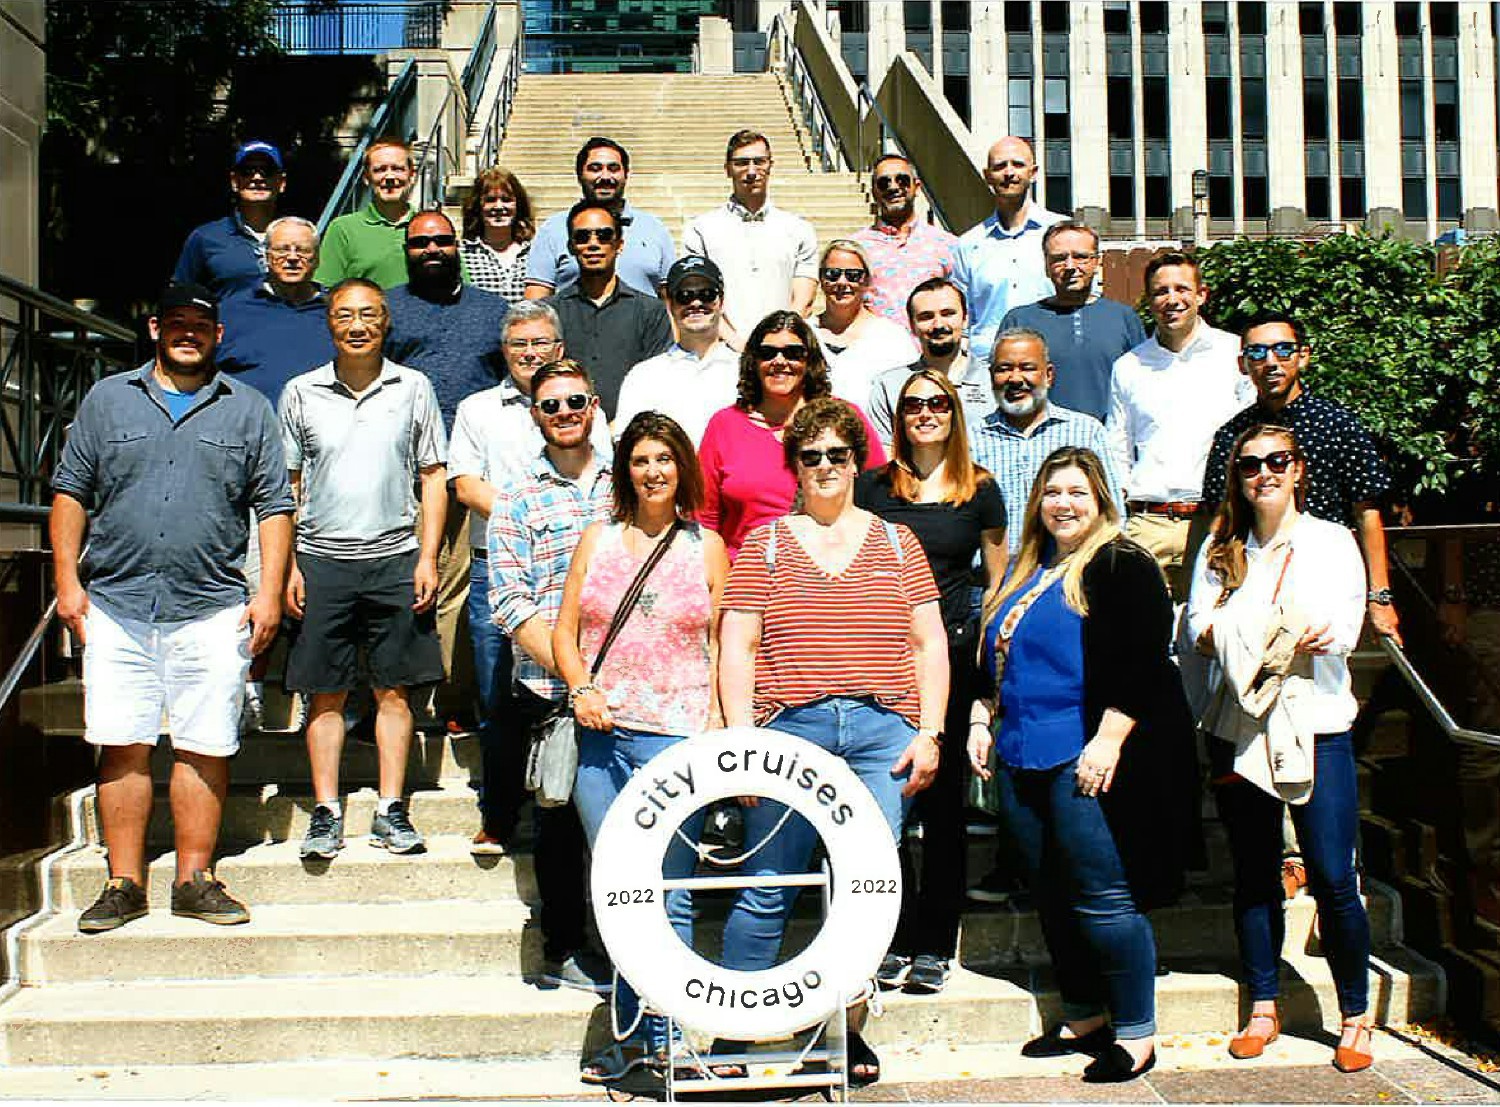 The Sasser Shared Services team getting ready to board the Odyssey Chicago River Boat for a fun employee outing.